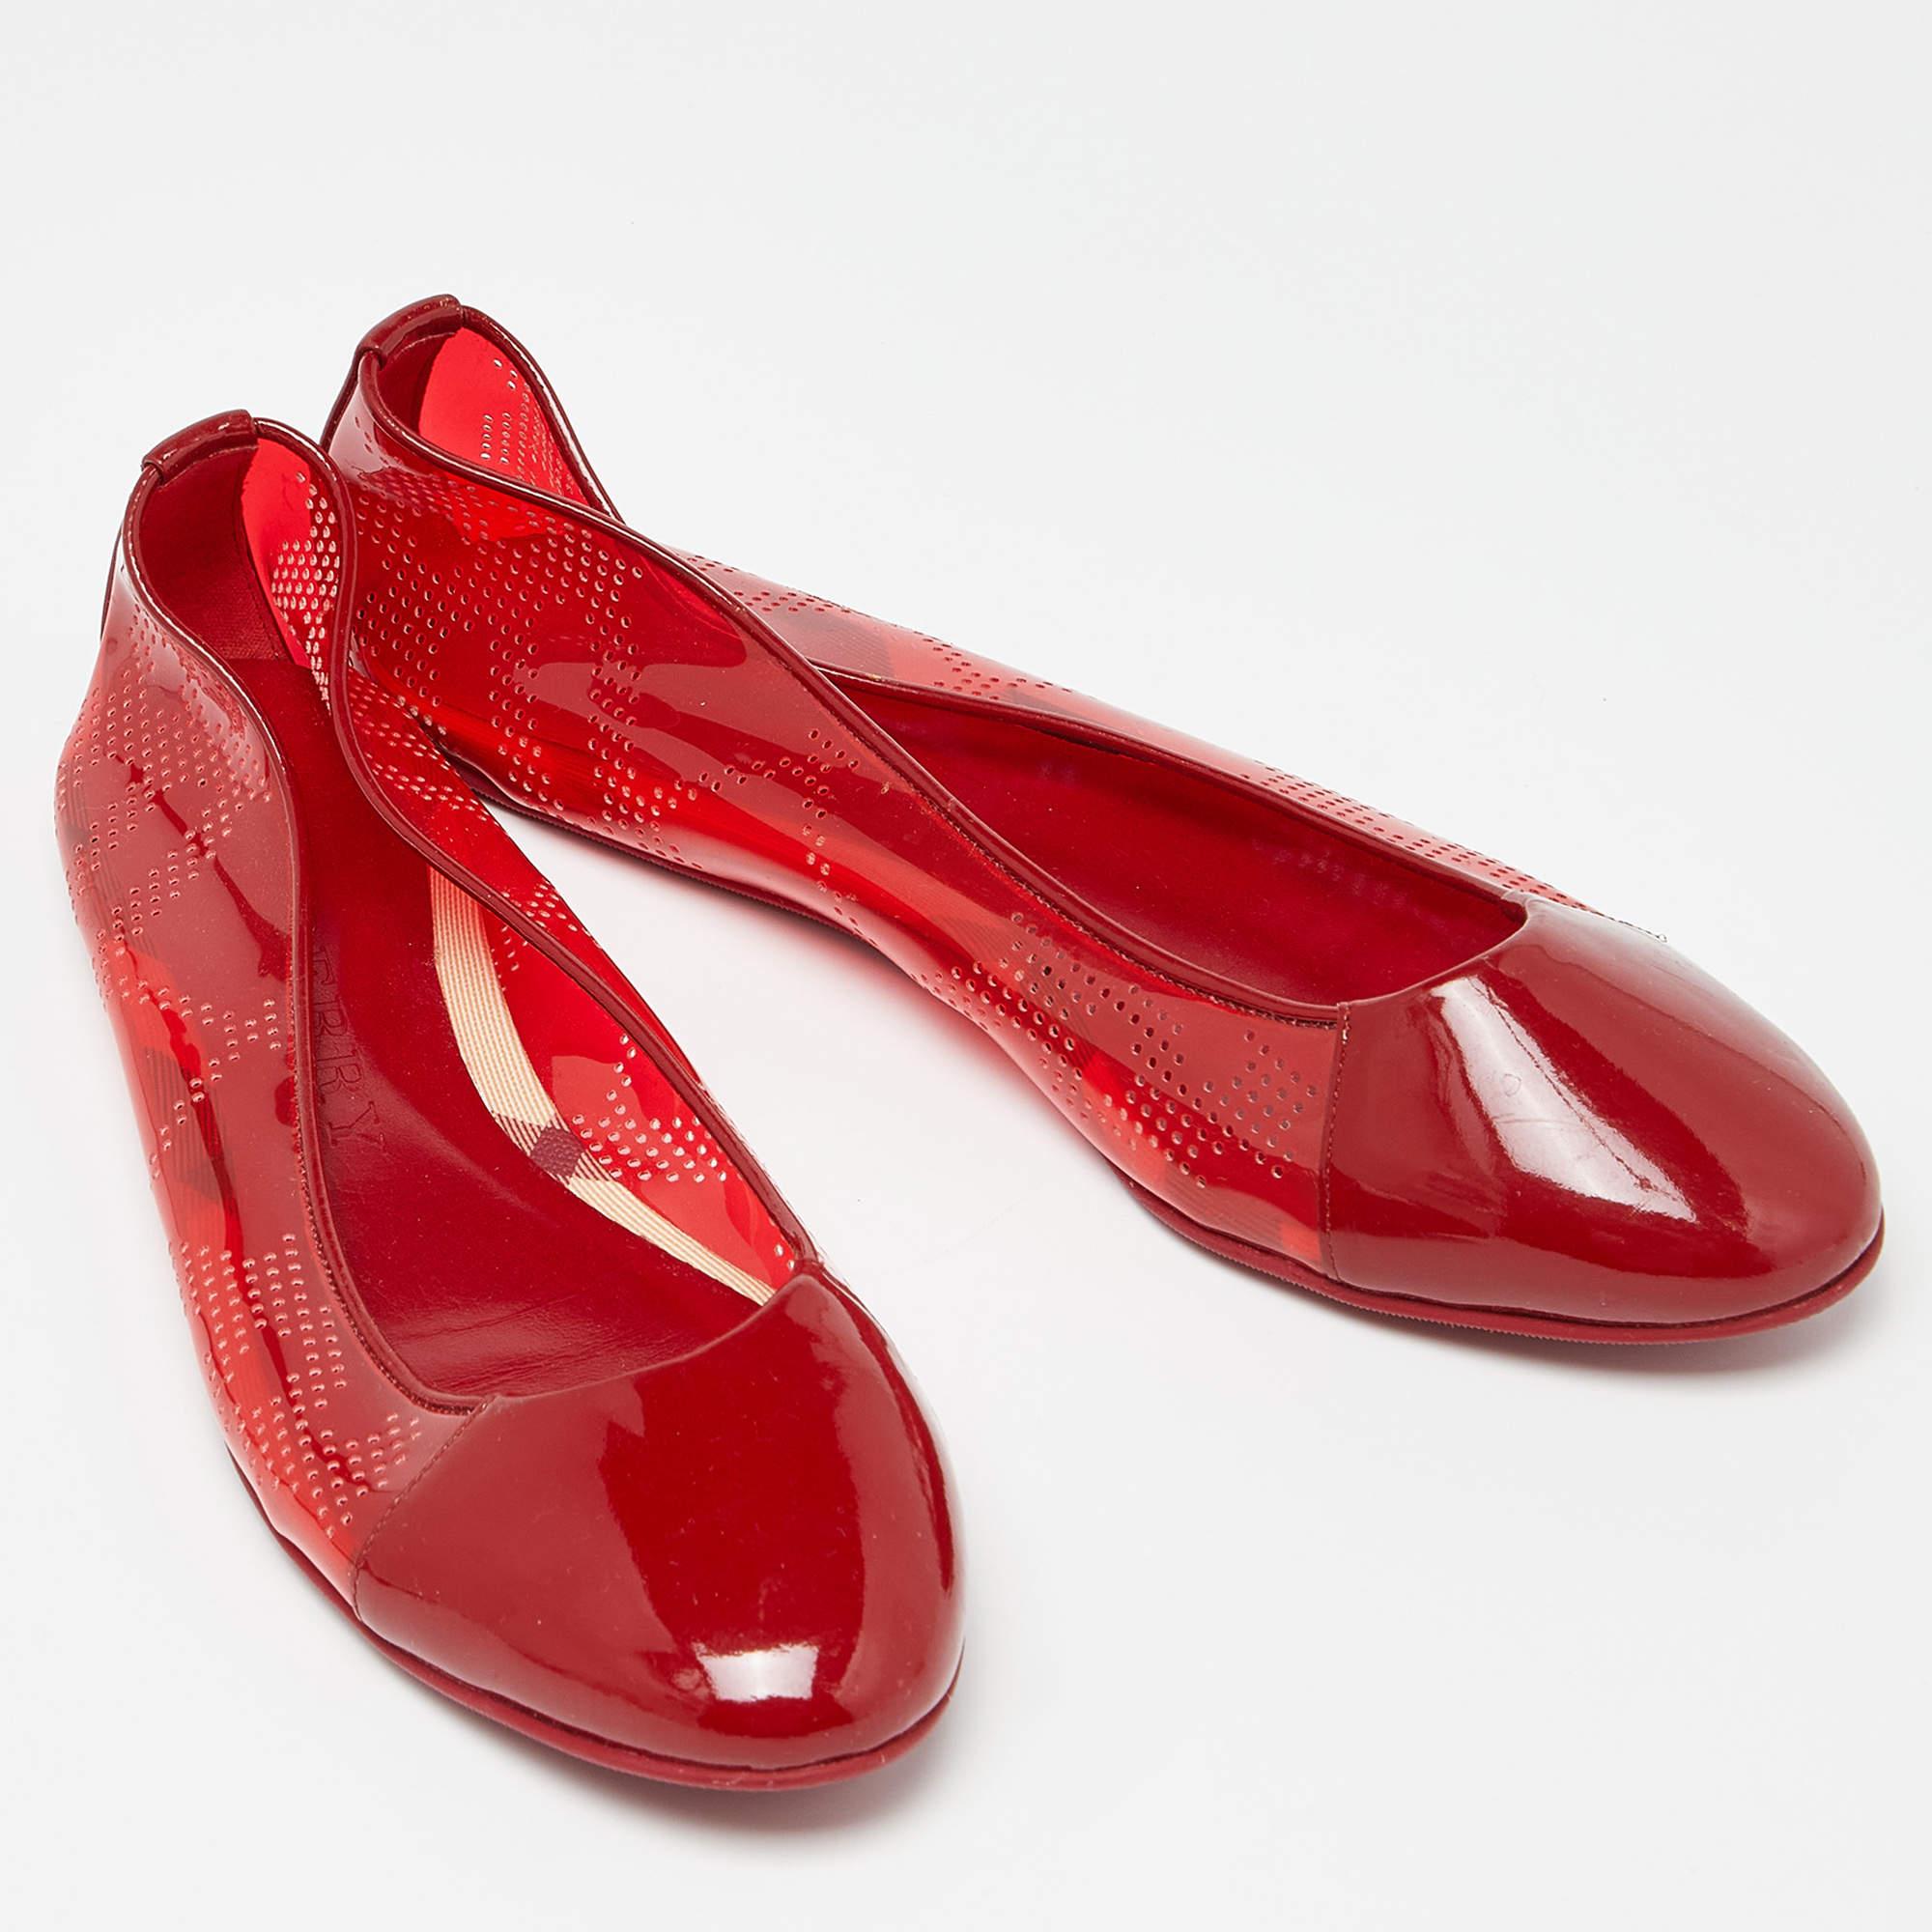 Burberry Red PVC and Patent Cap Toe Ballet Flats Size 41 In Good Condition For Sale In Dubai, Al Qouz 2